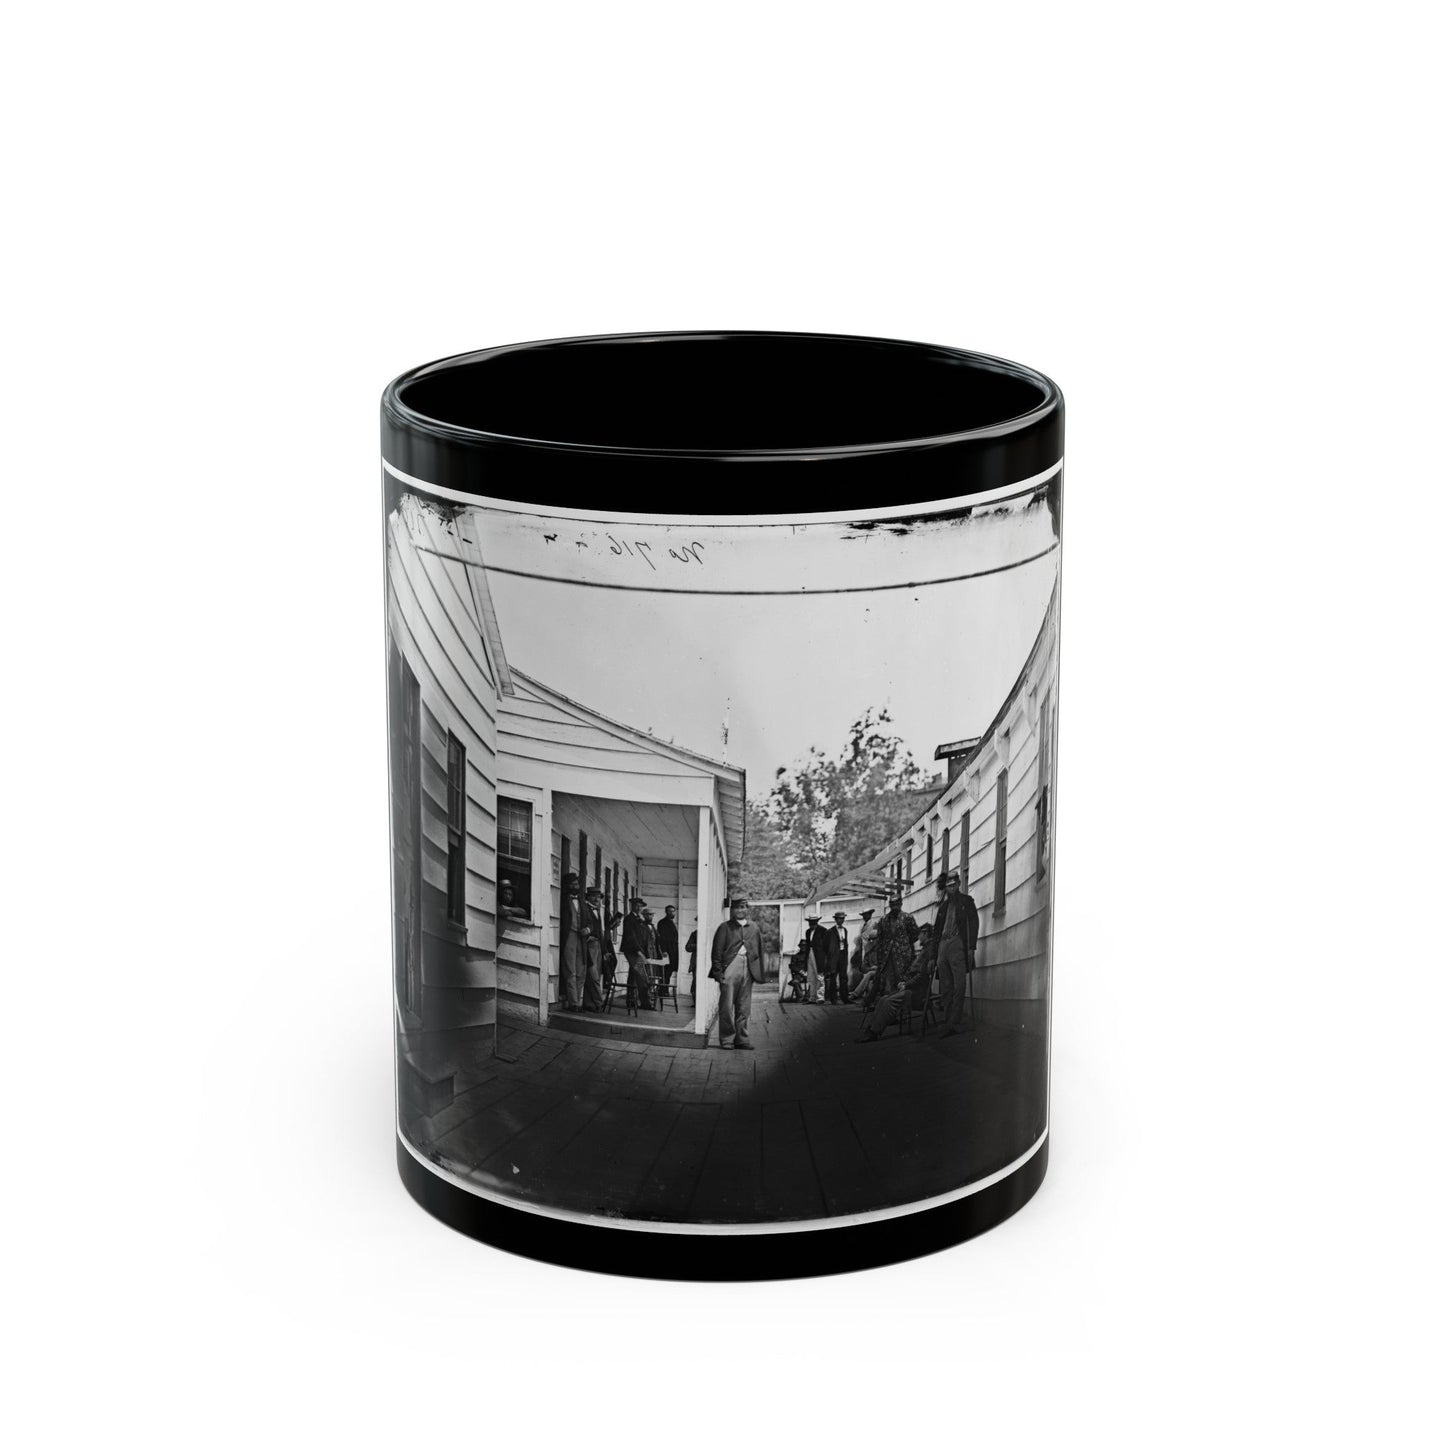 Washington, D.C. Convalescent Soldiers And Others Outside Quarters Of The Sanitary Commission Home Lodge (U.S. Civil War) Black Coffee Mug